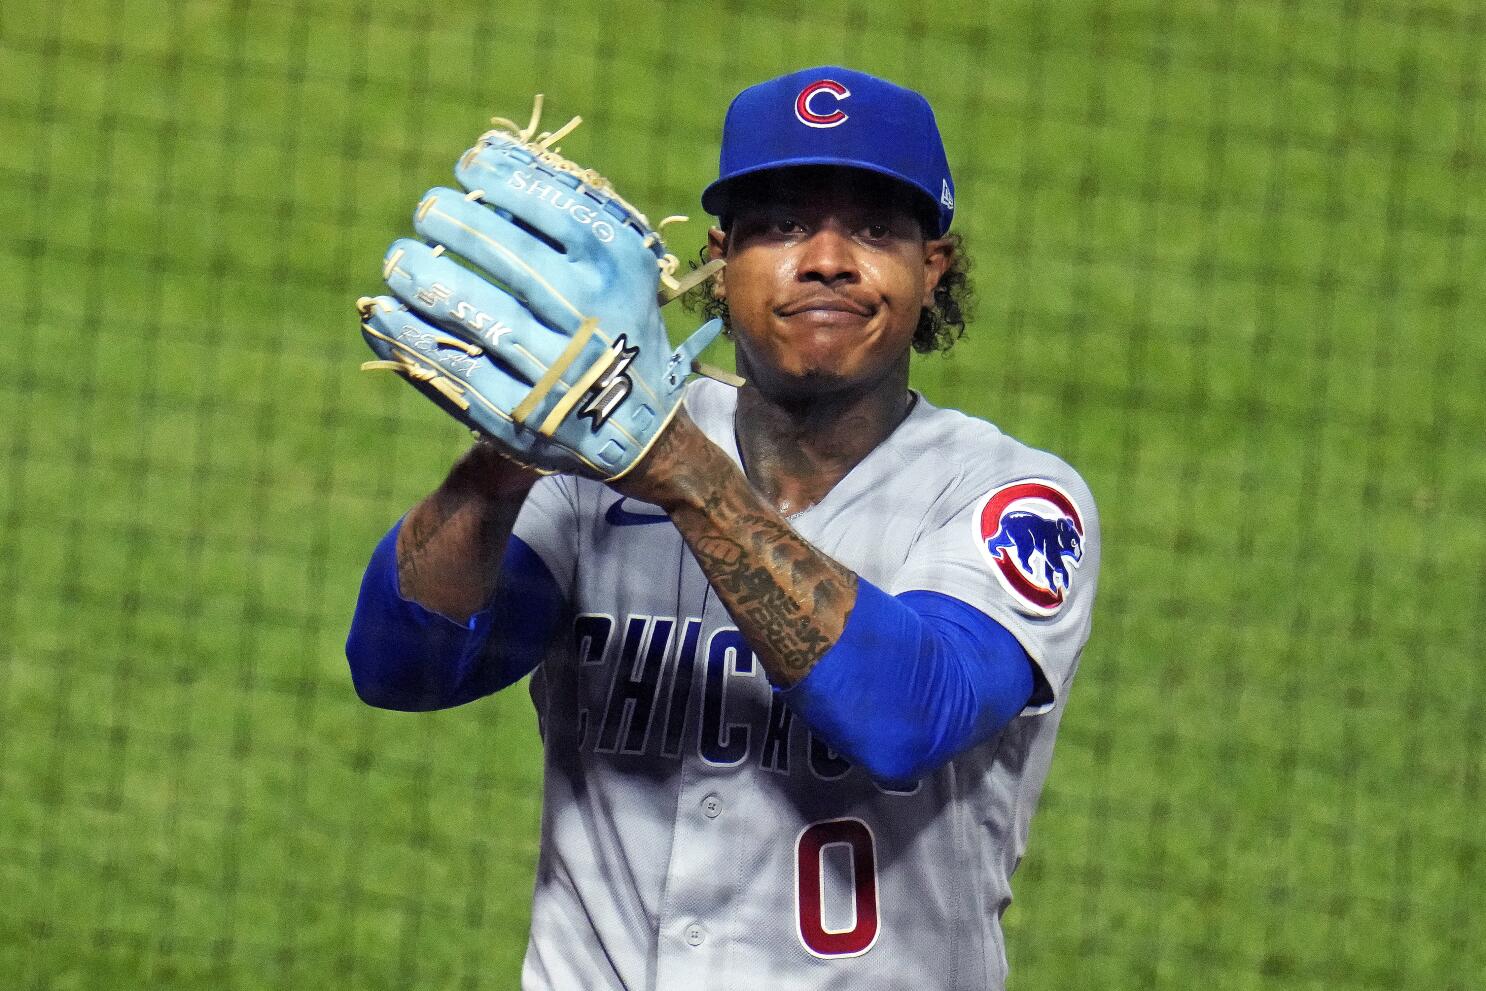 The Chicago Cubs scored 20 runs & 16 runs in back-to-back nights